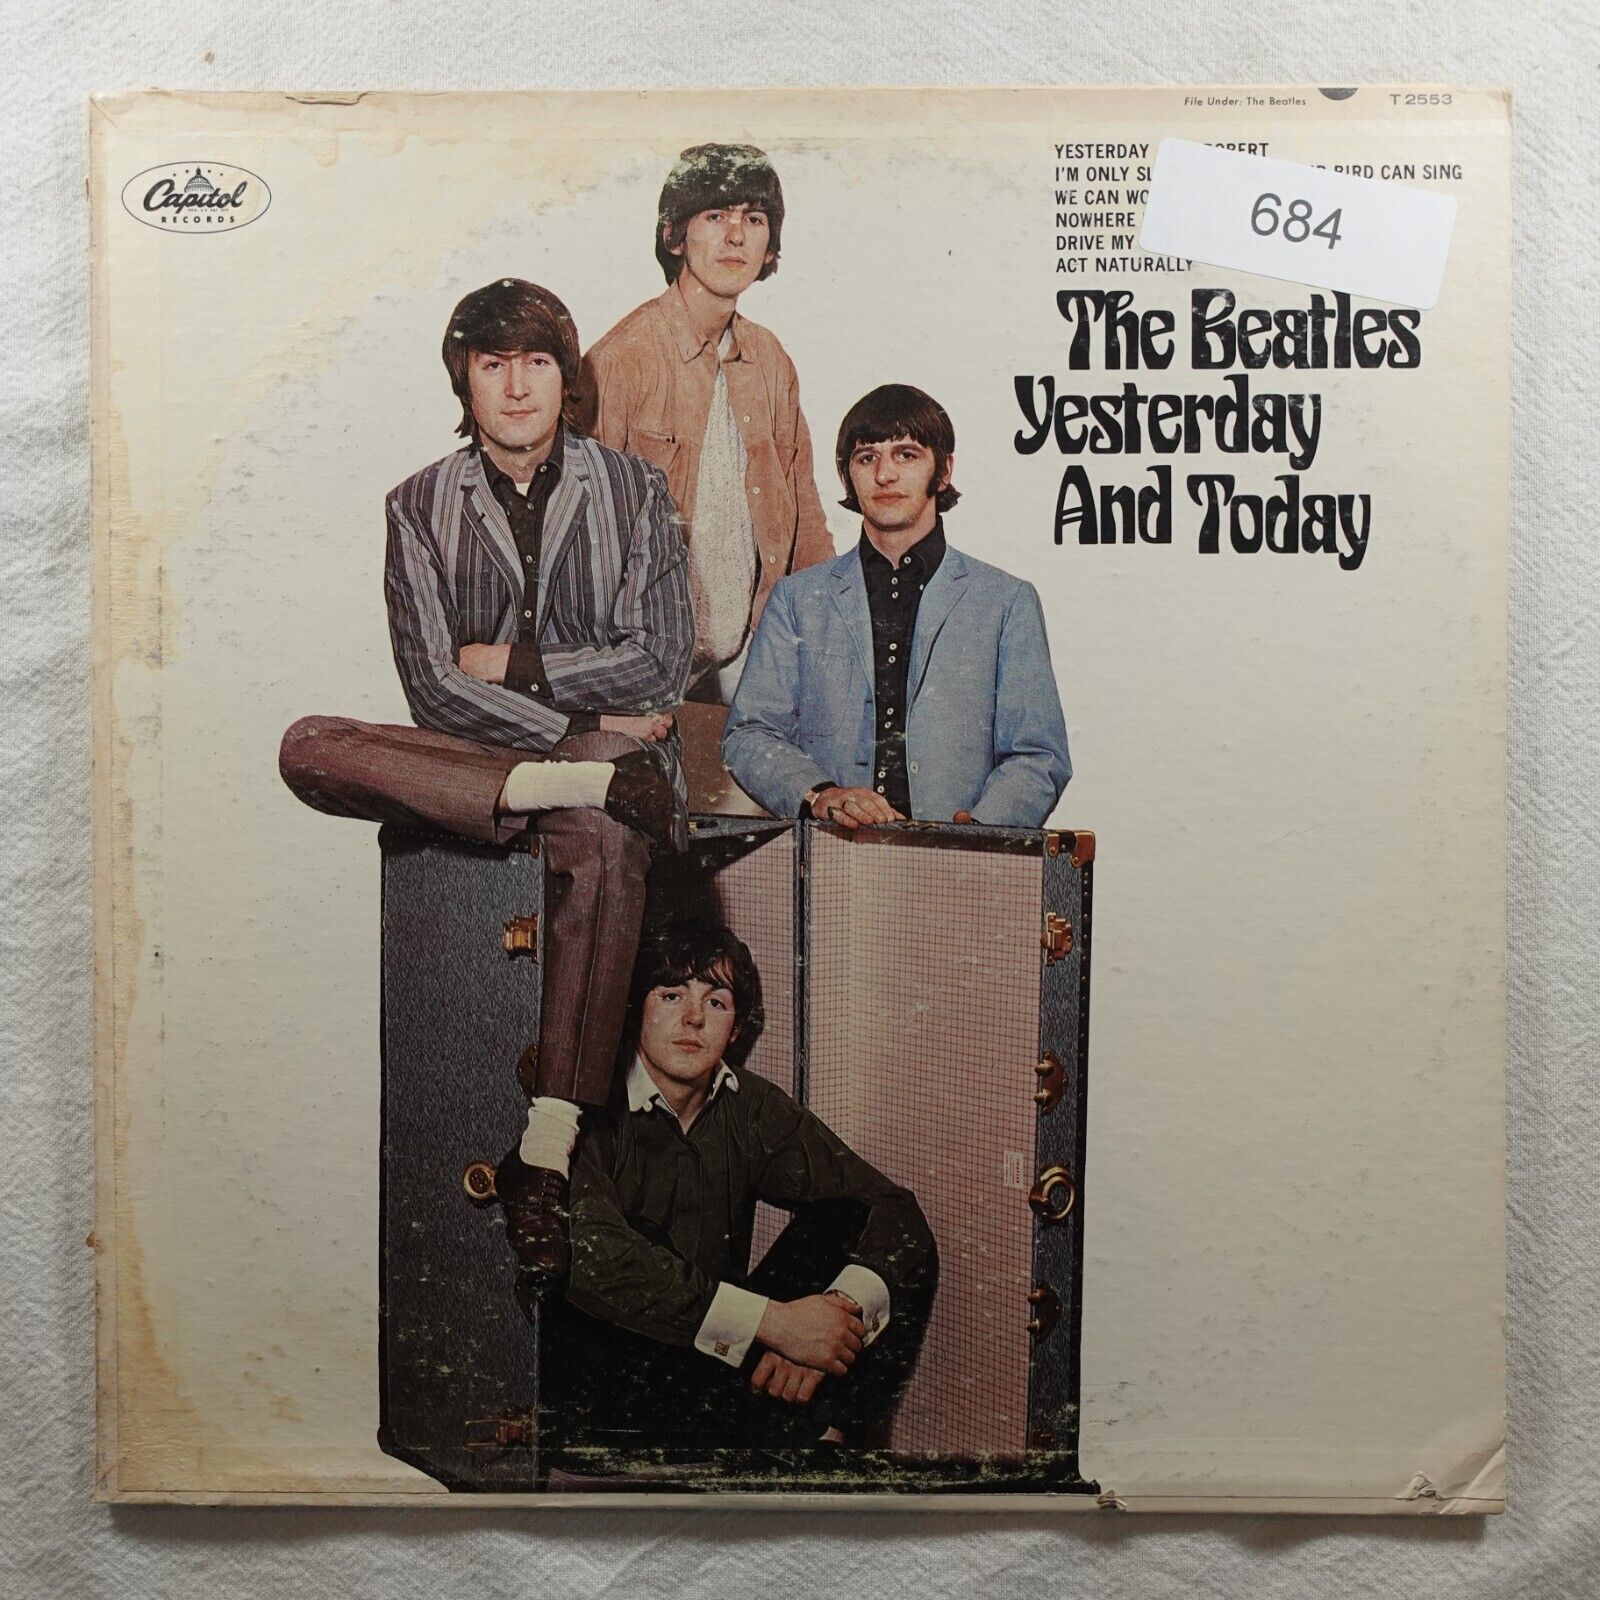 The Beatles Yesterday and Today Capitol T 2553 Record Album Vinyl LP